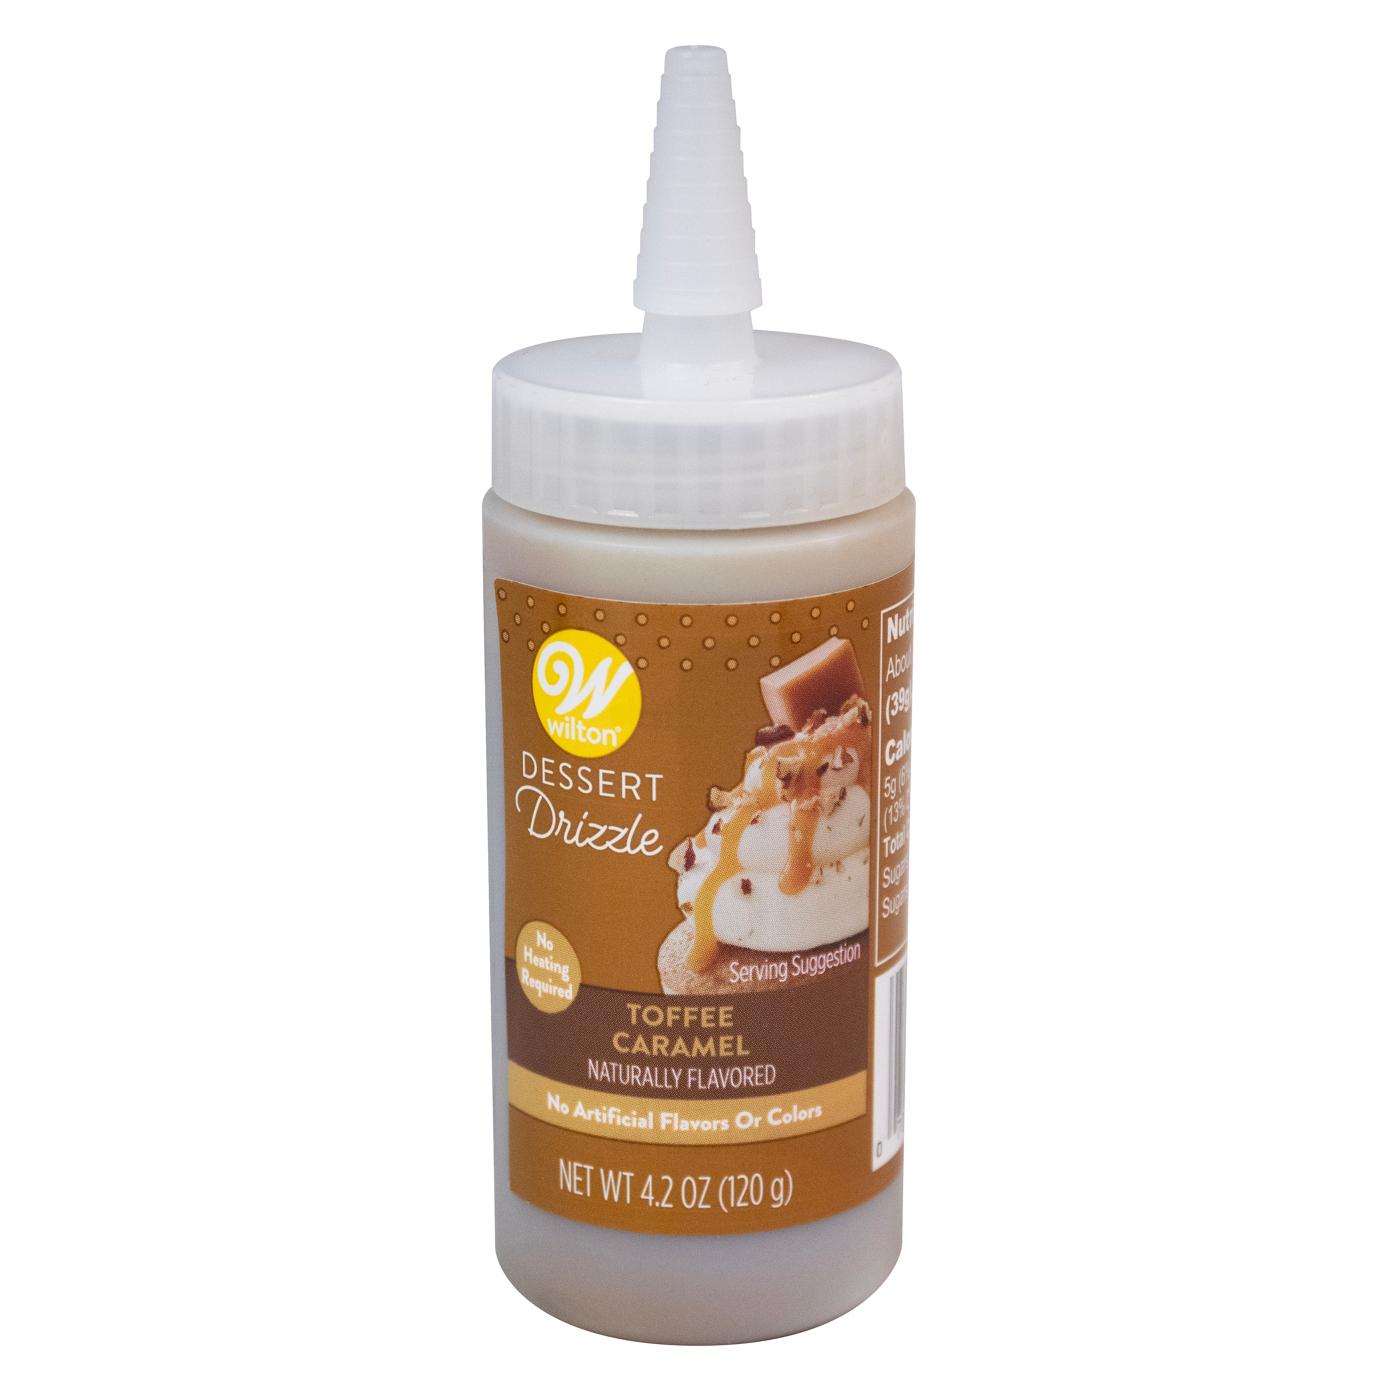 Wilton Gold Pearlized Sugar Sprinkles - Shop Icing & Decorations at H-E-B